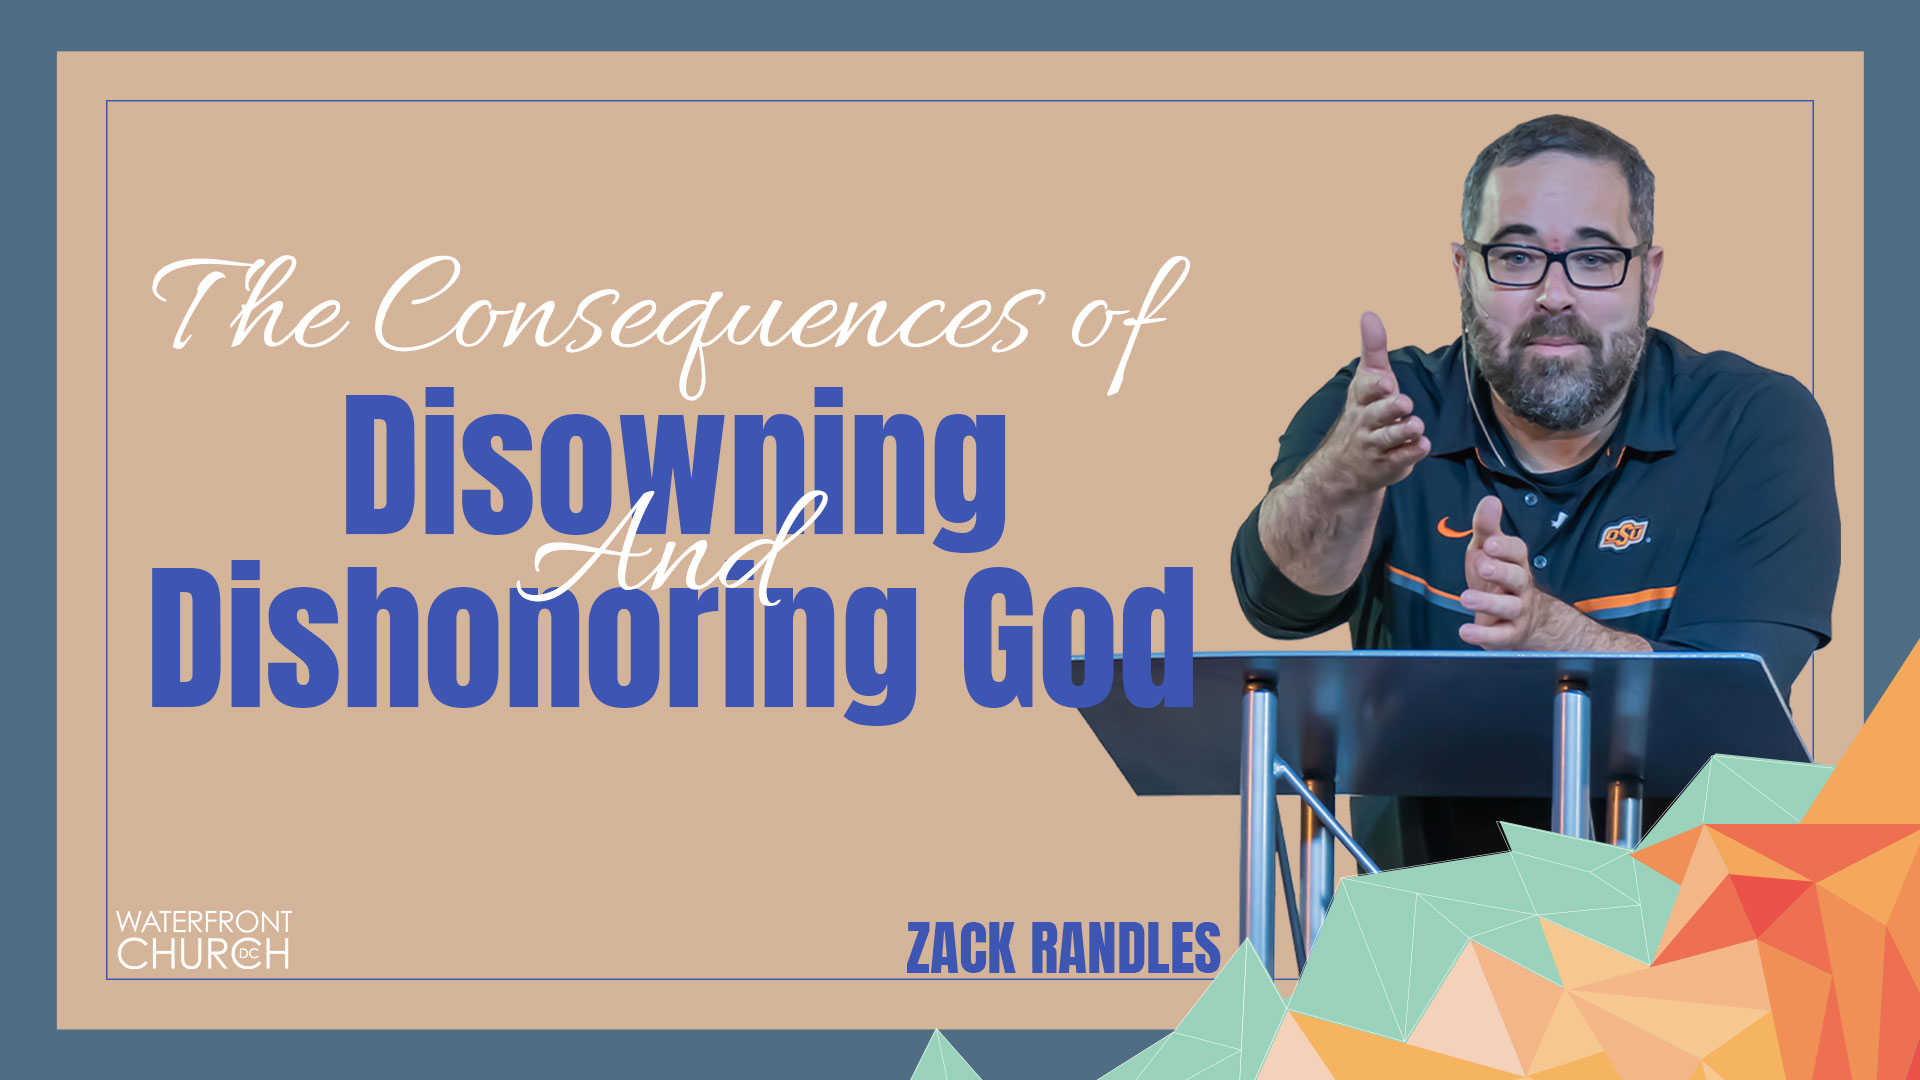 The Consequences of Disowning and Dishonoring God